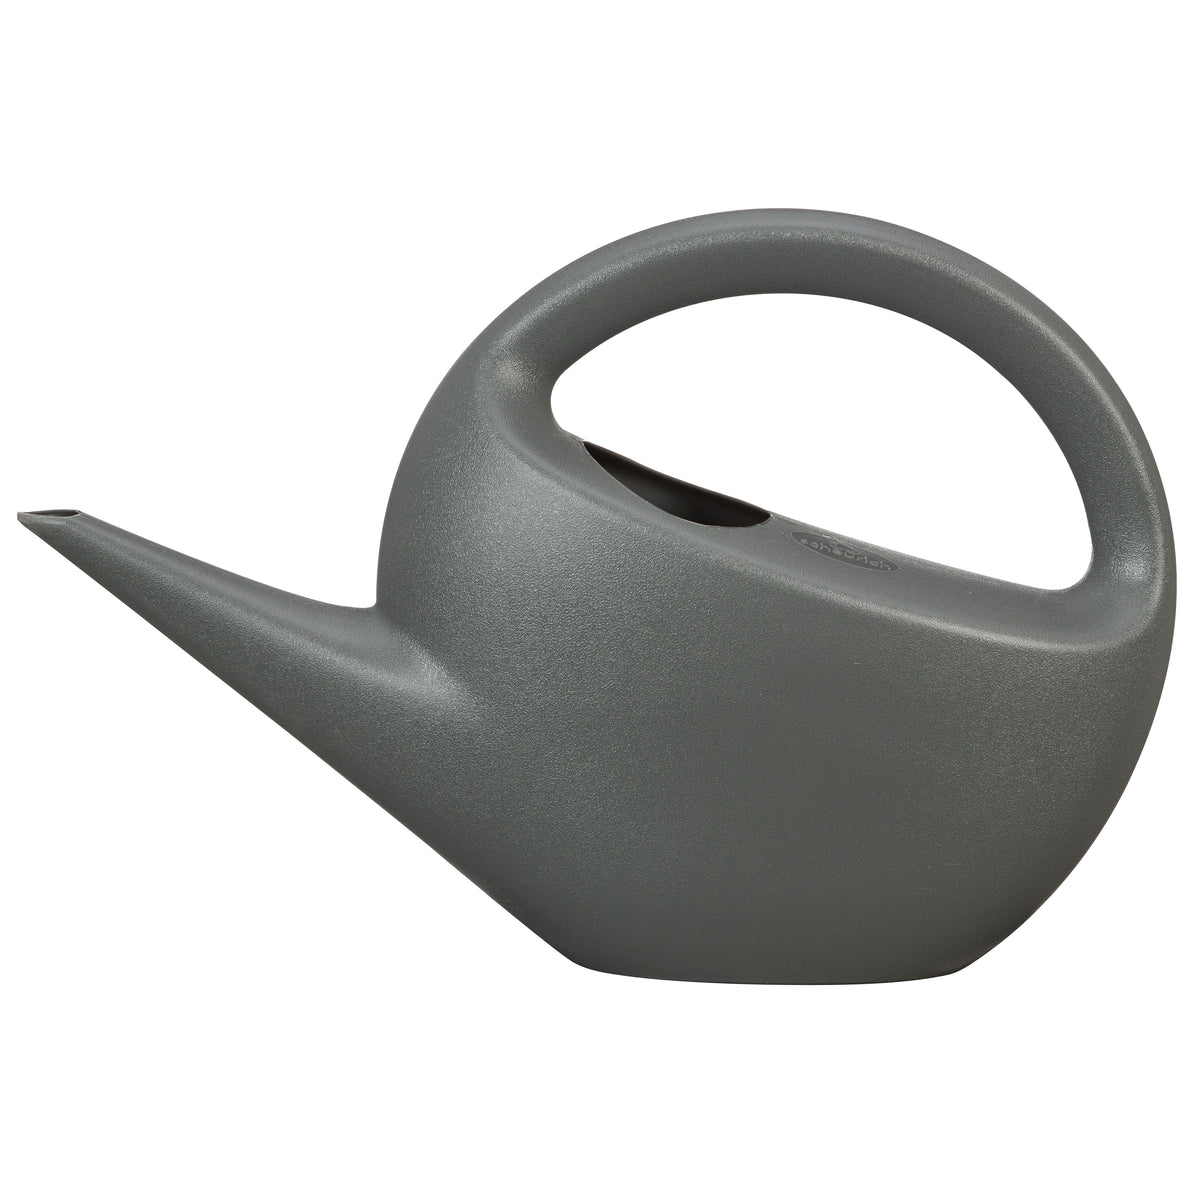 0.8 gallons Matt Anthracite Watering Can